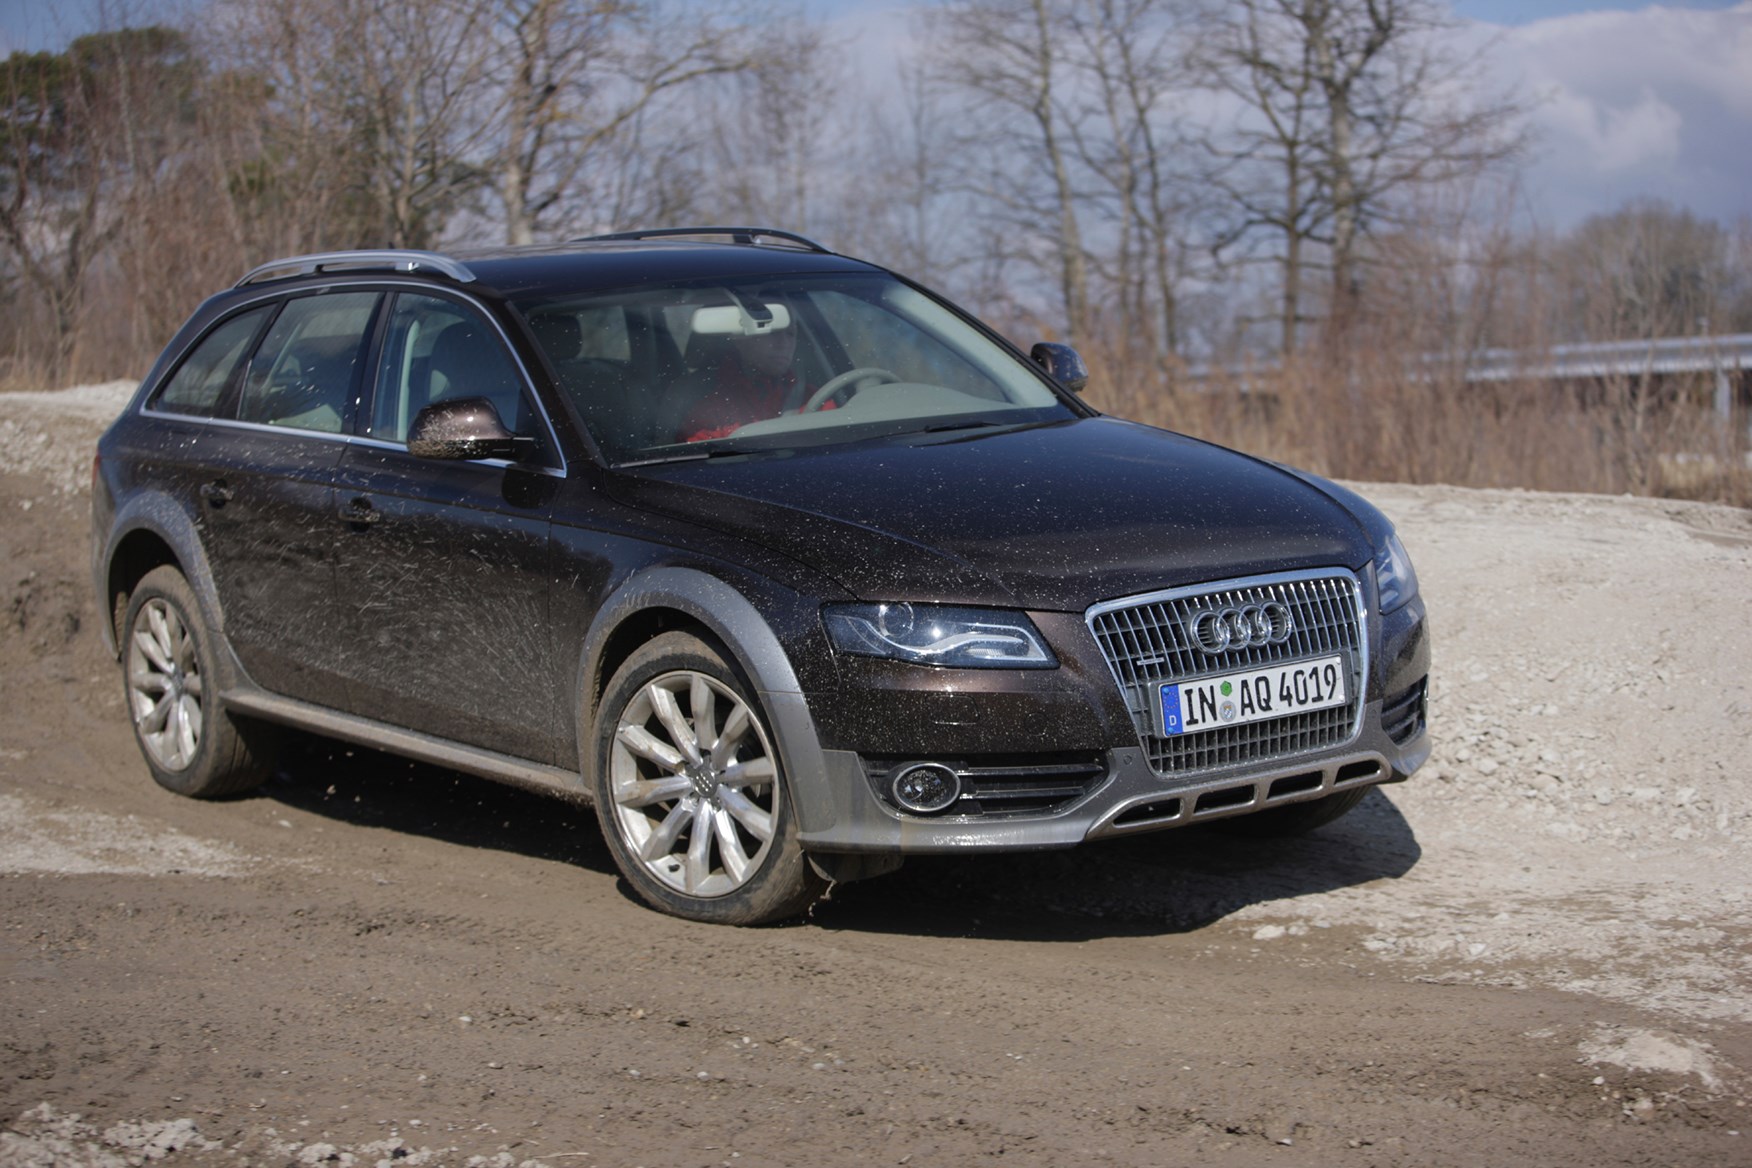 Used Audi A4 Allroad (2009 - 2015) Review | Parkers